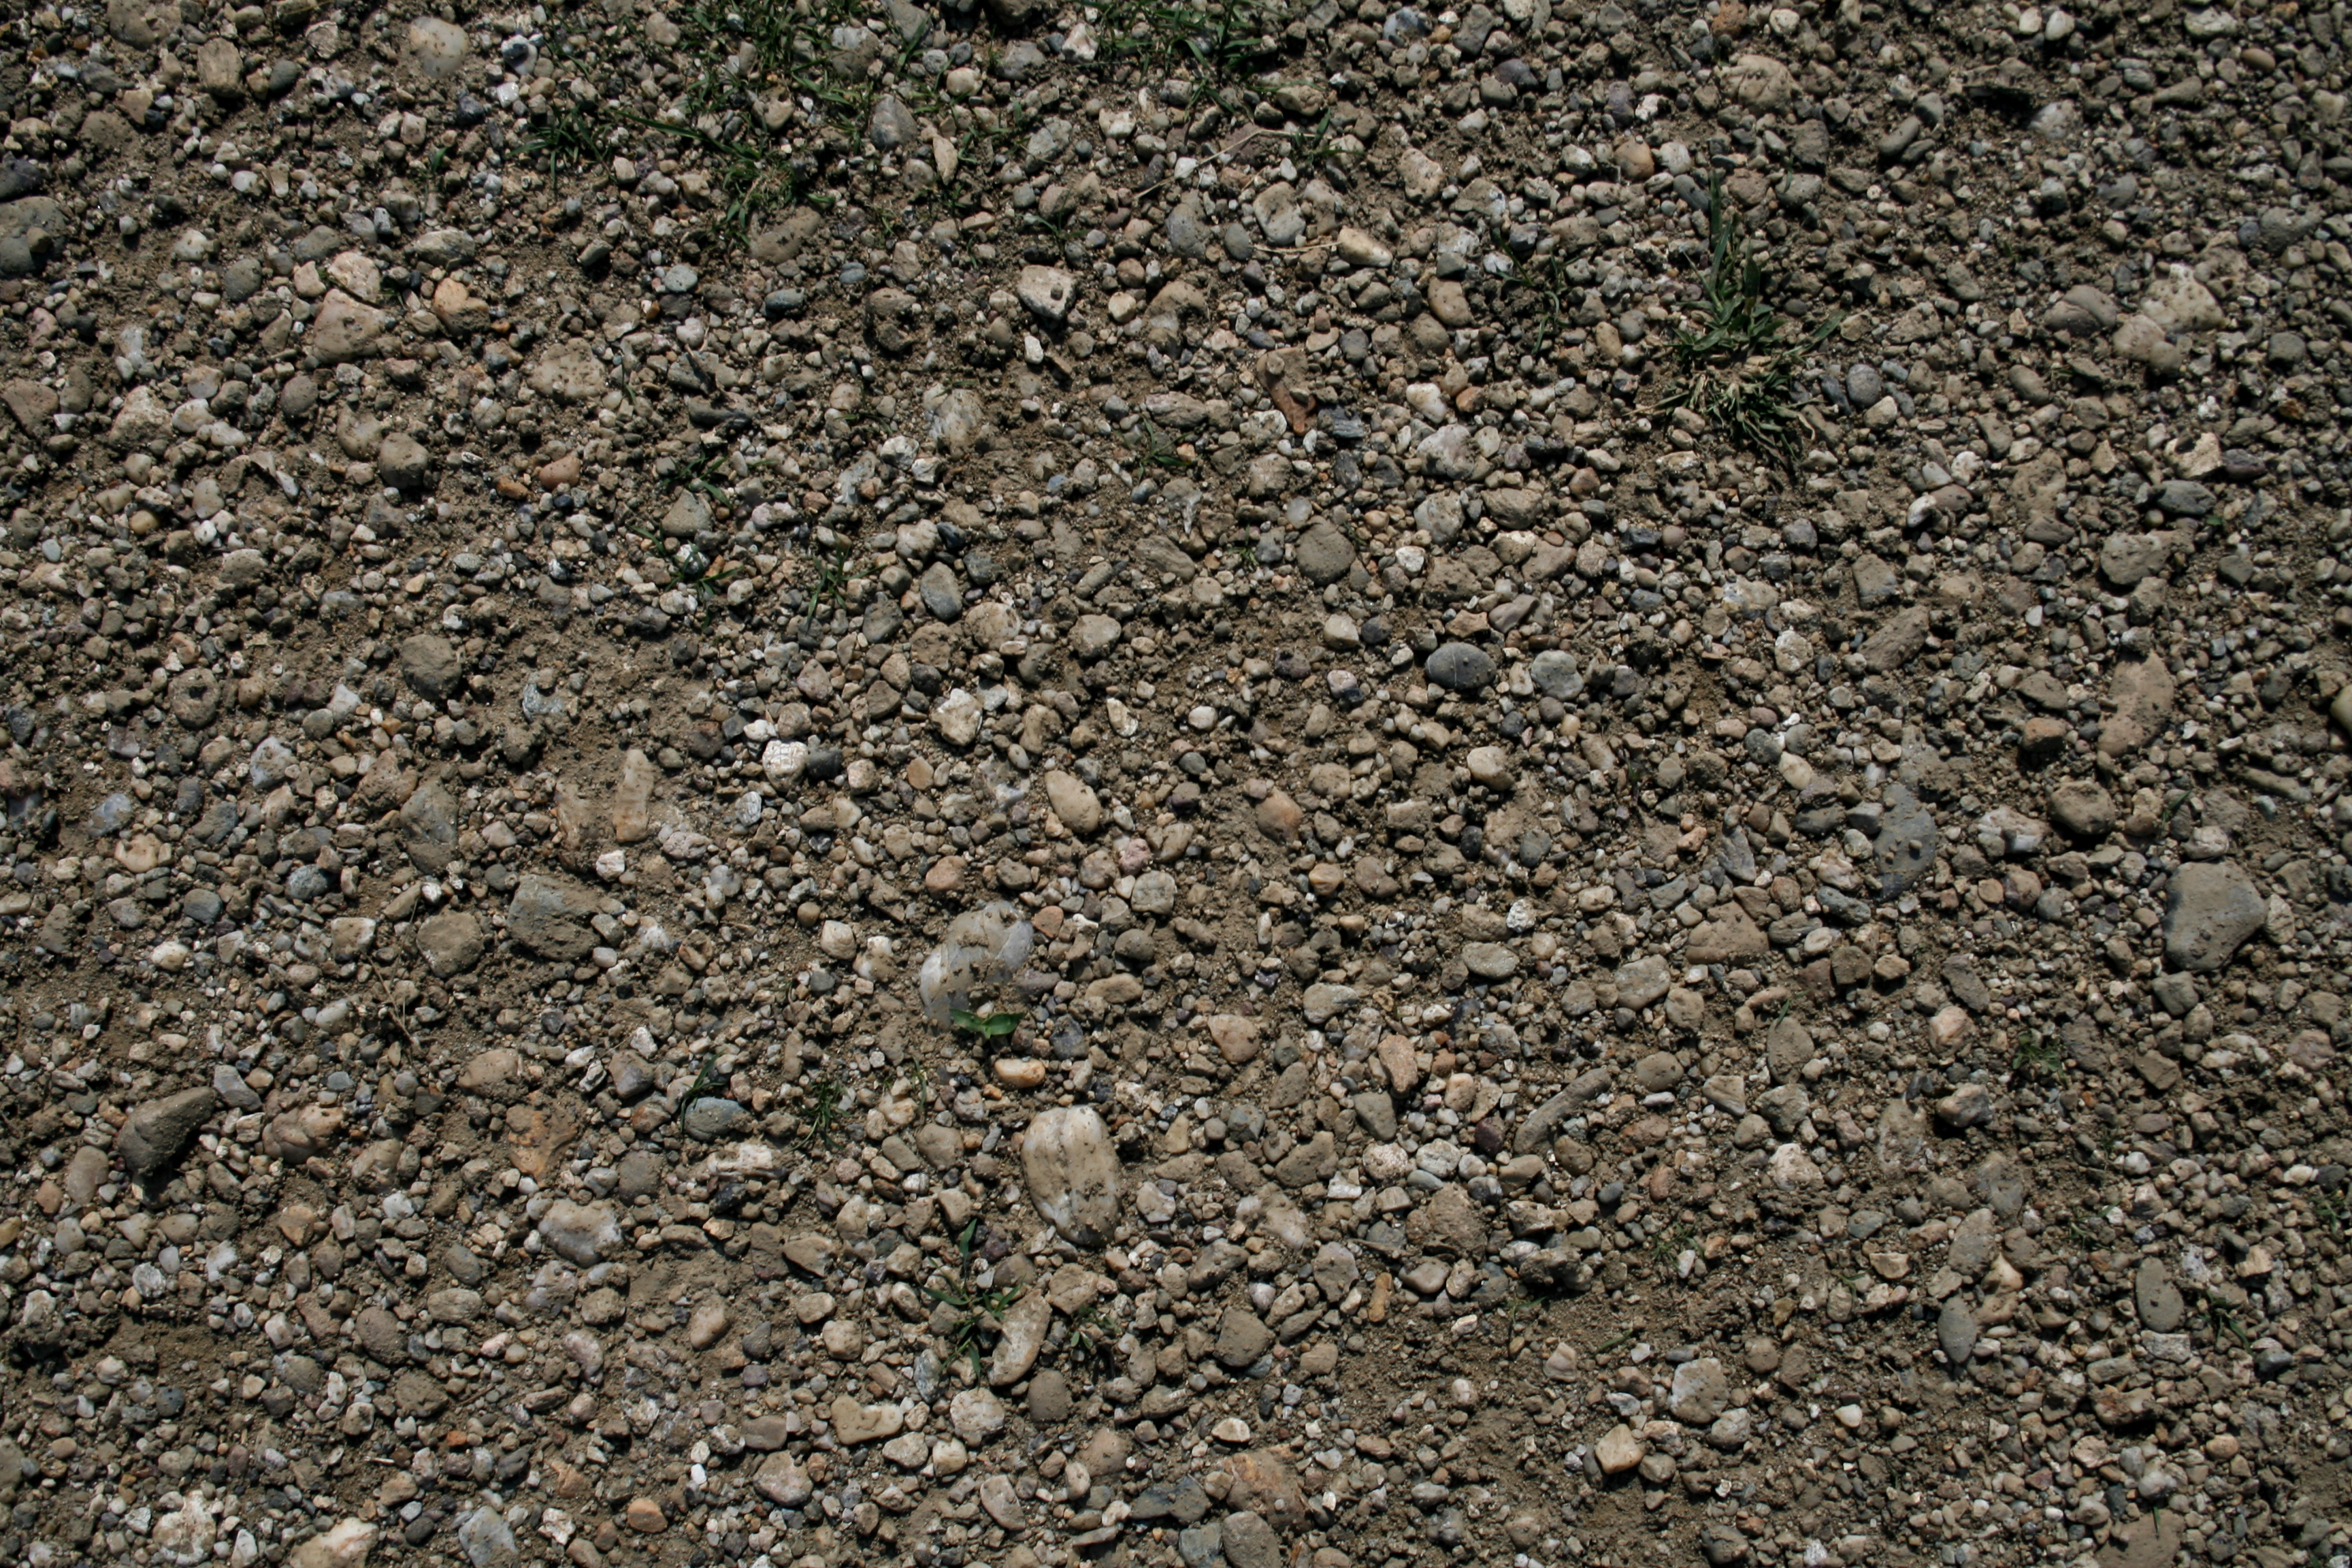 9+1 HQ ground texture | Textures for photoshop free